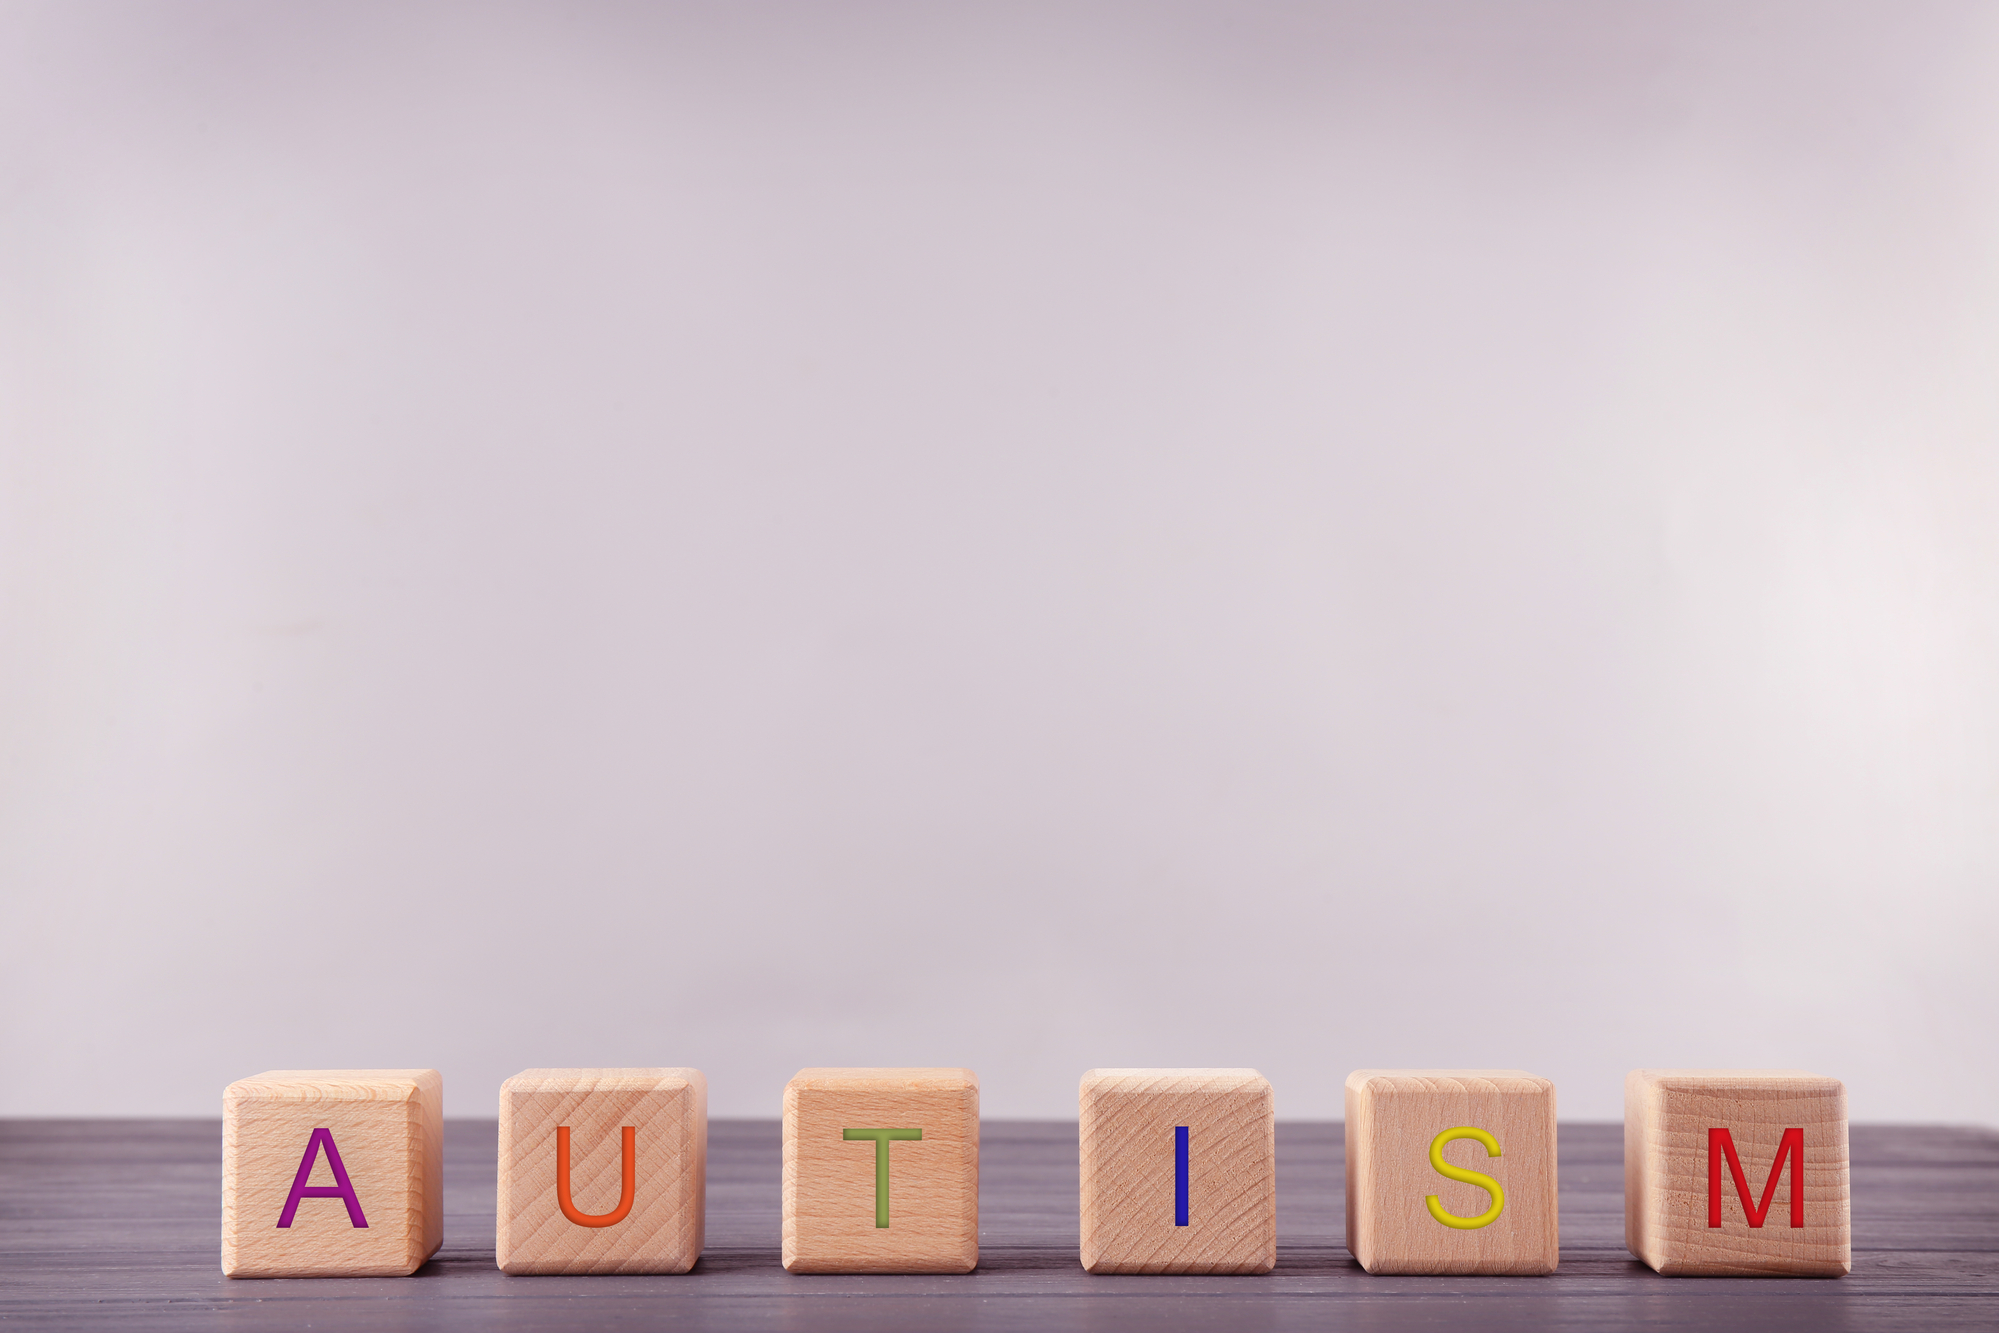 Signs and symptoms of autism in a 3-year-old